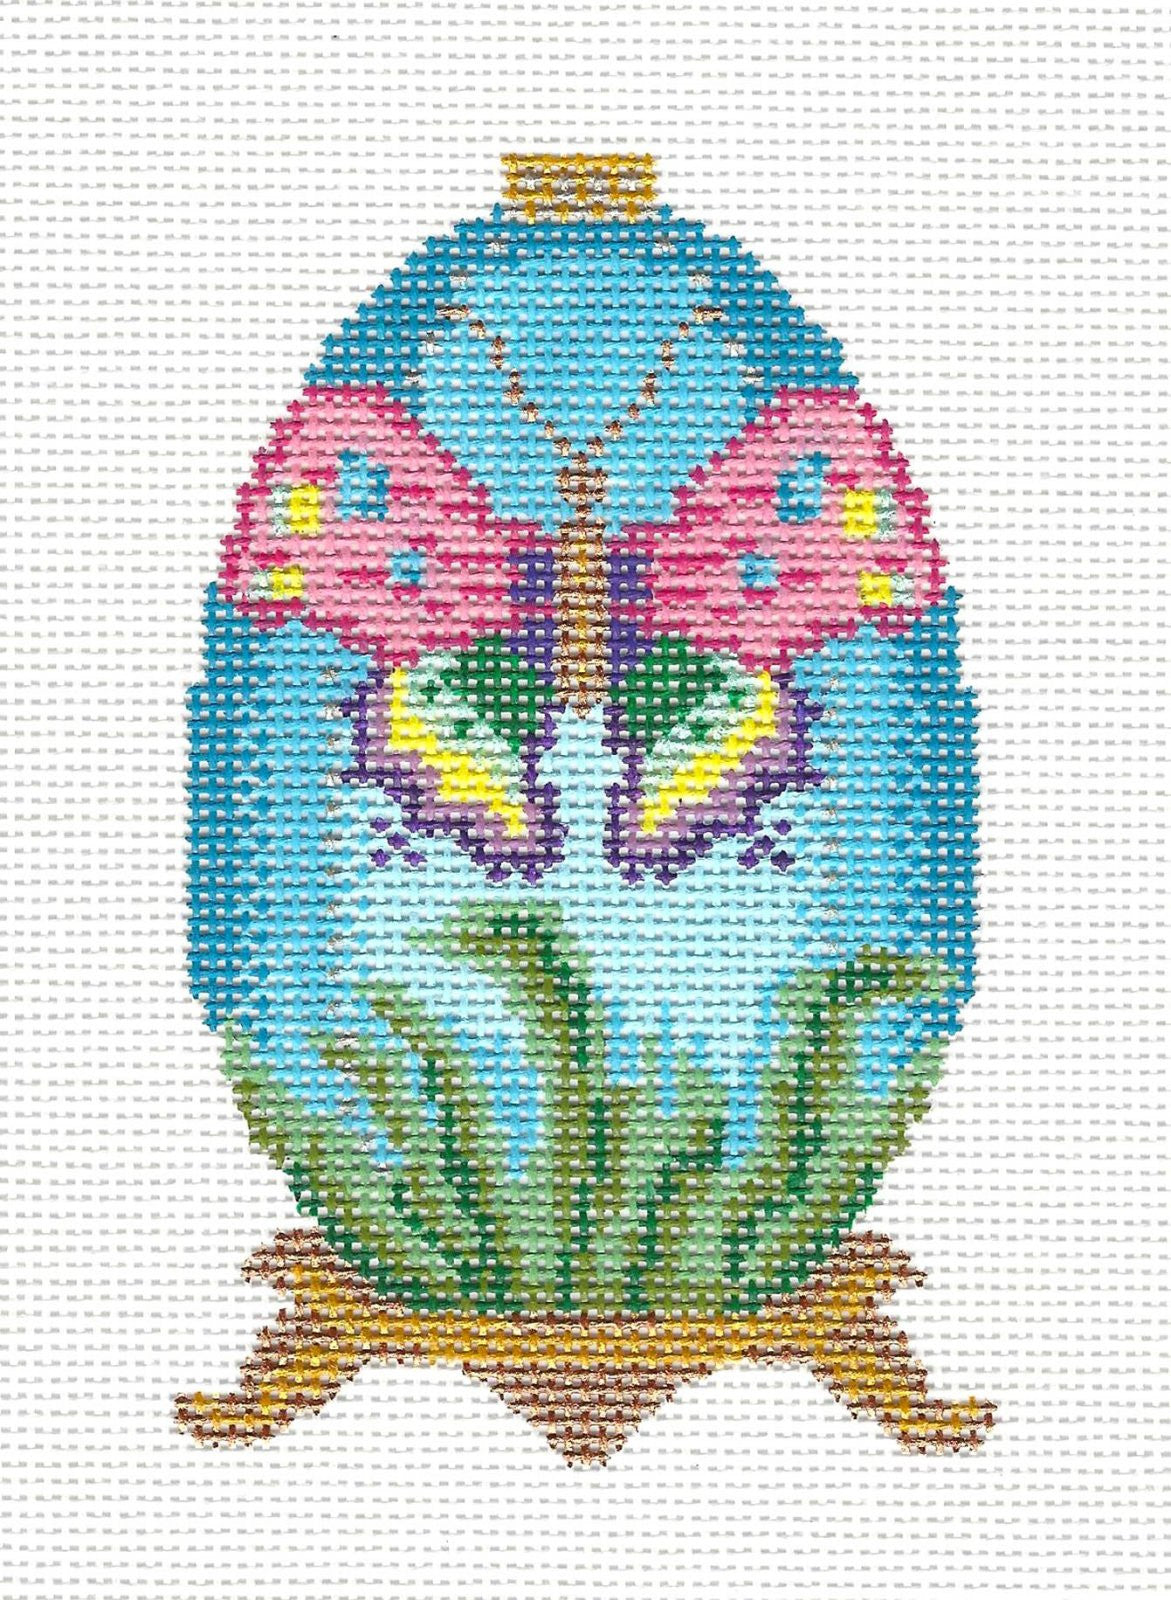 Egg ~ Butterfly Jeweled Egg Ornament on Handpainted Needlepoint Canvas from Danji Designs